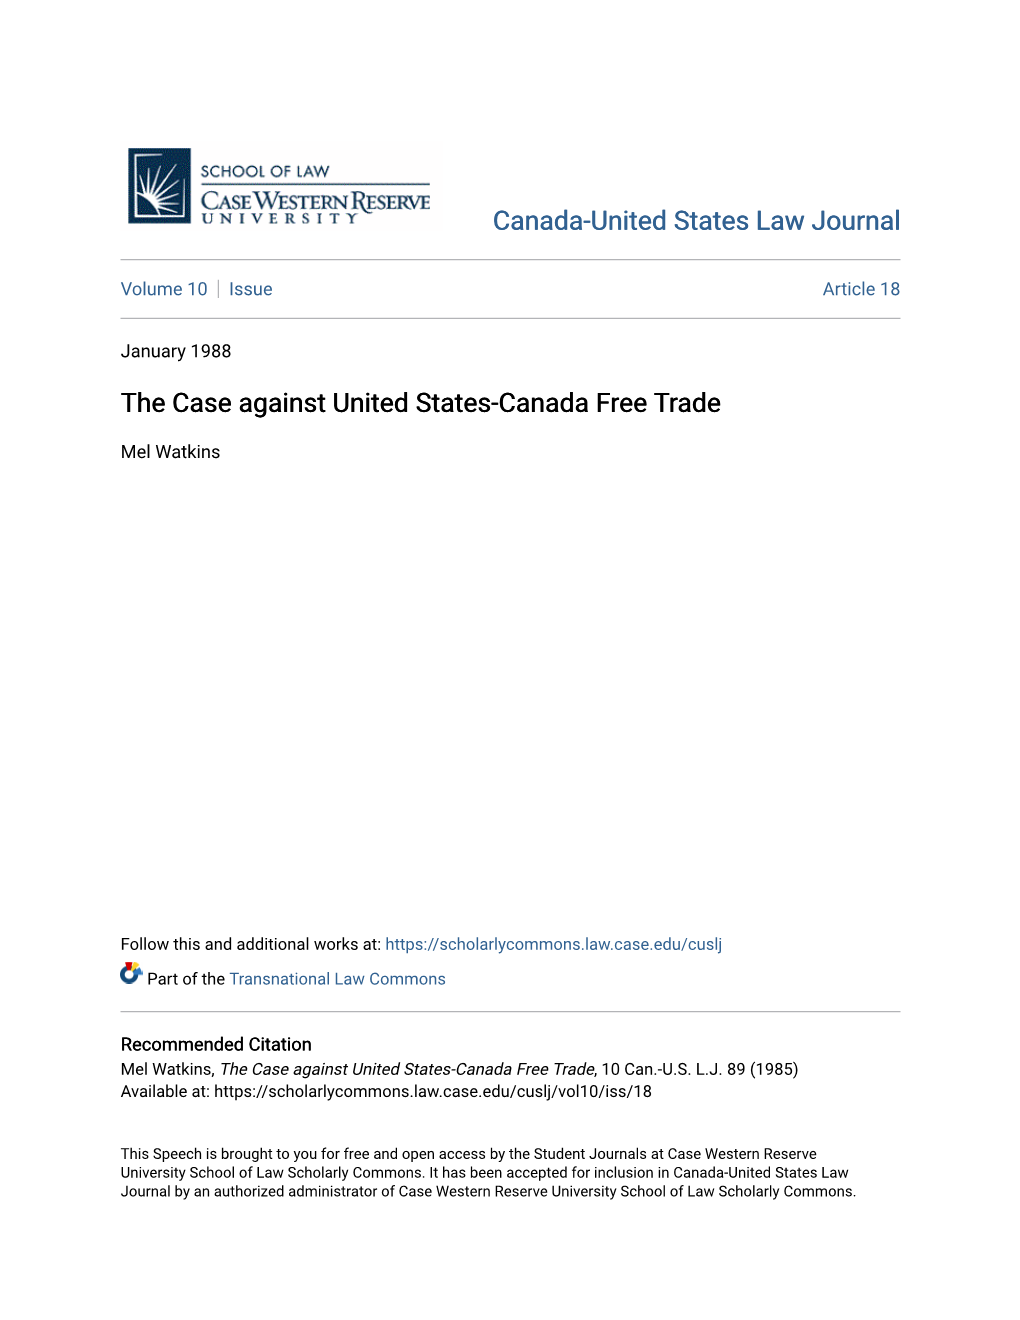 The Case Against United States-Canada Free Trade